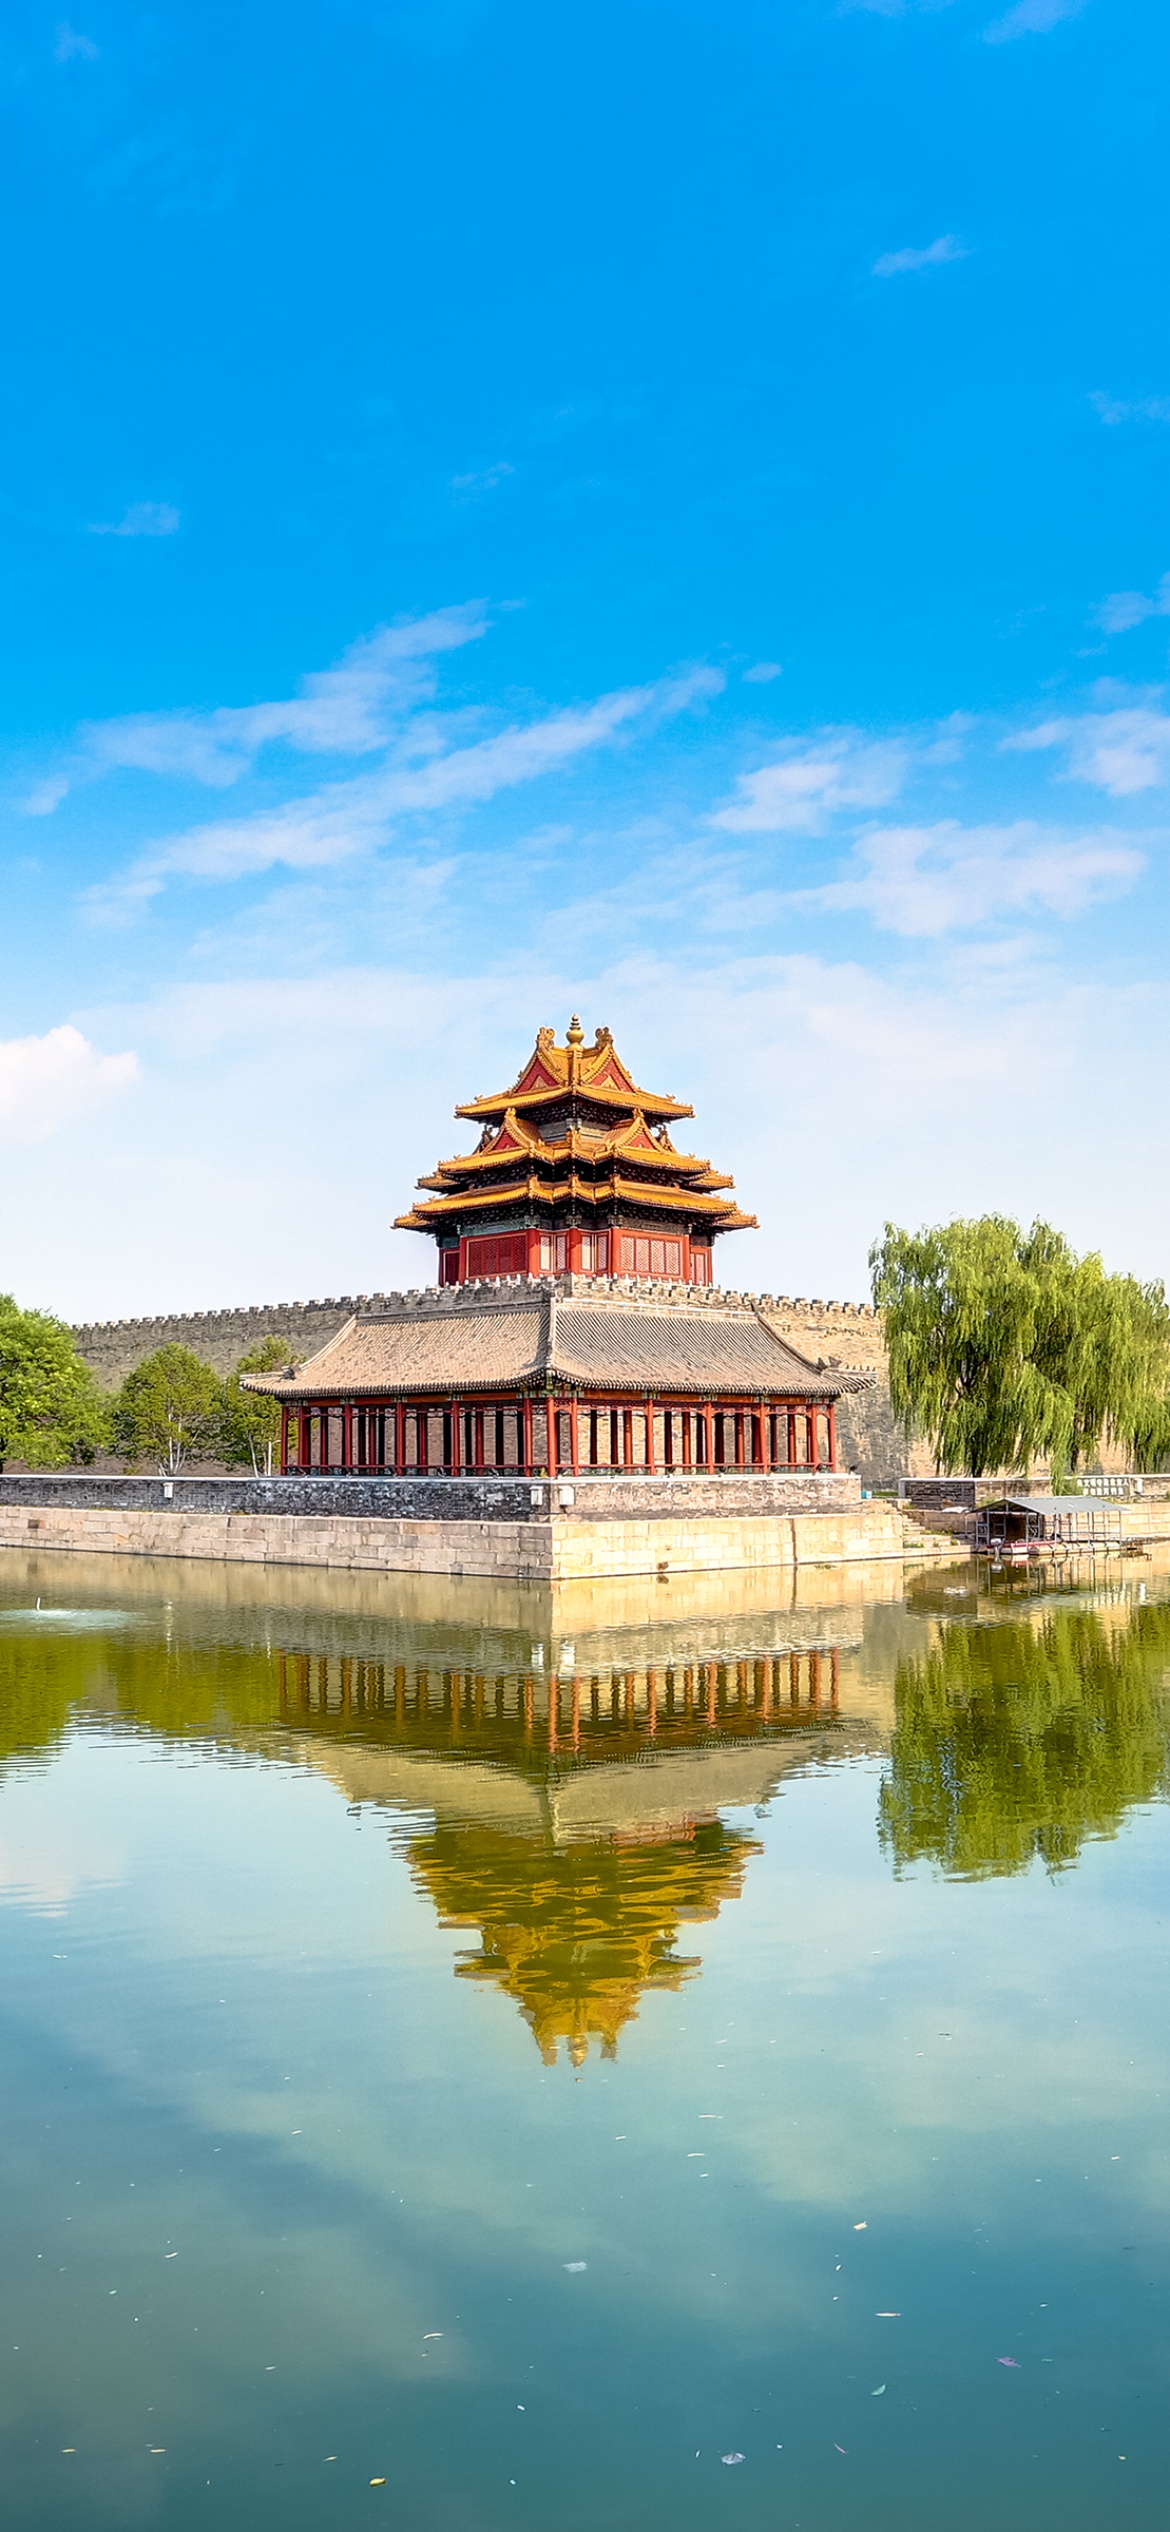 Forbidden City Wallpaper 4K, Beijing, China, Museum, Imperial Palace ...